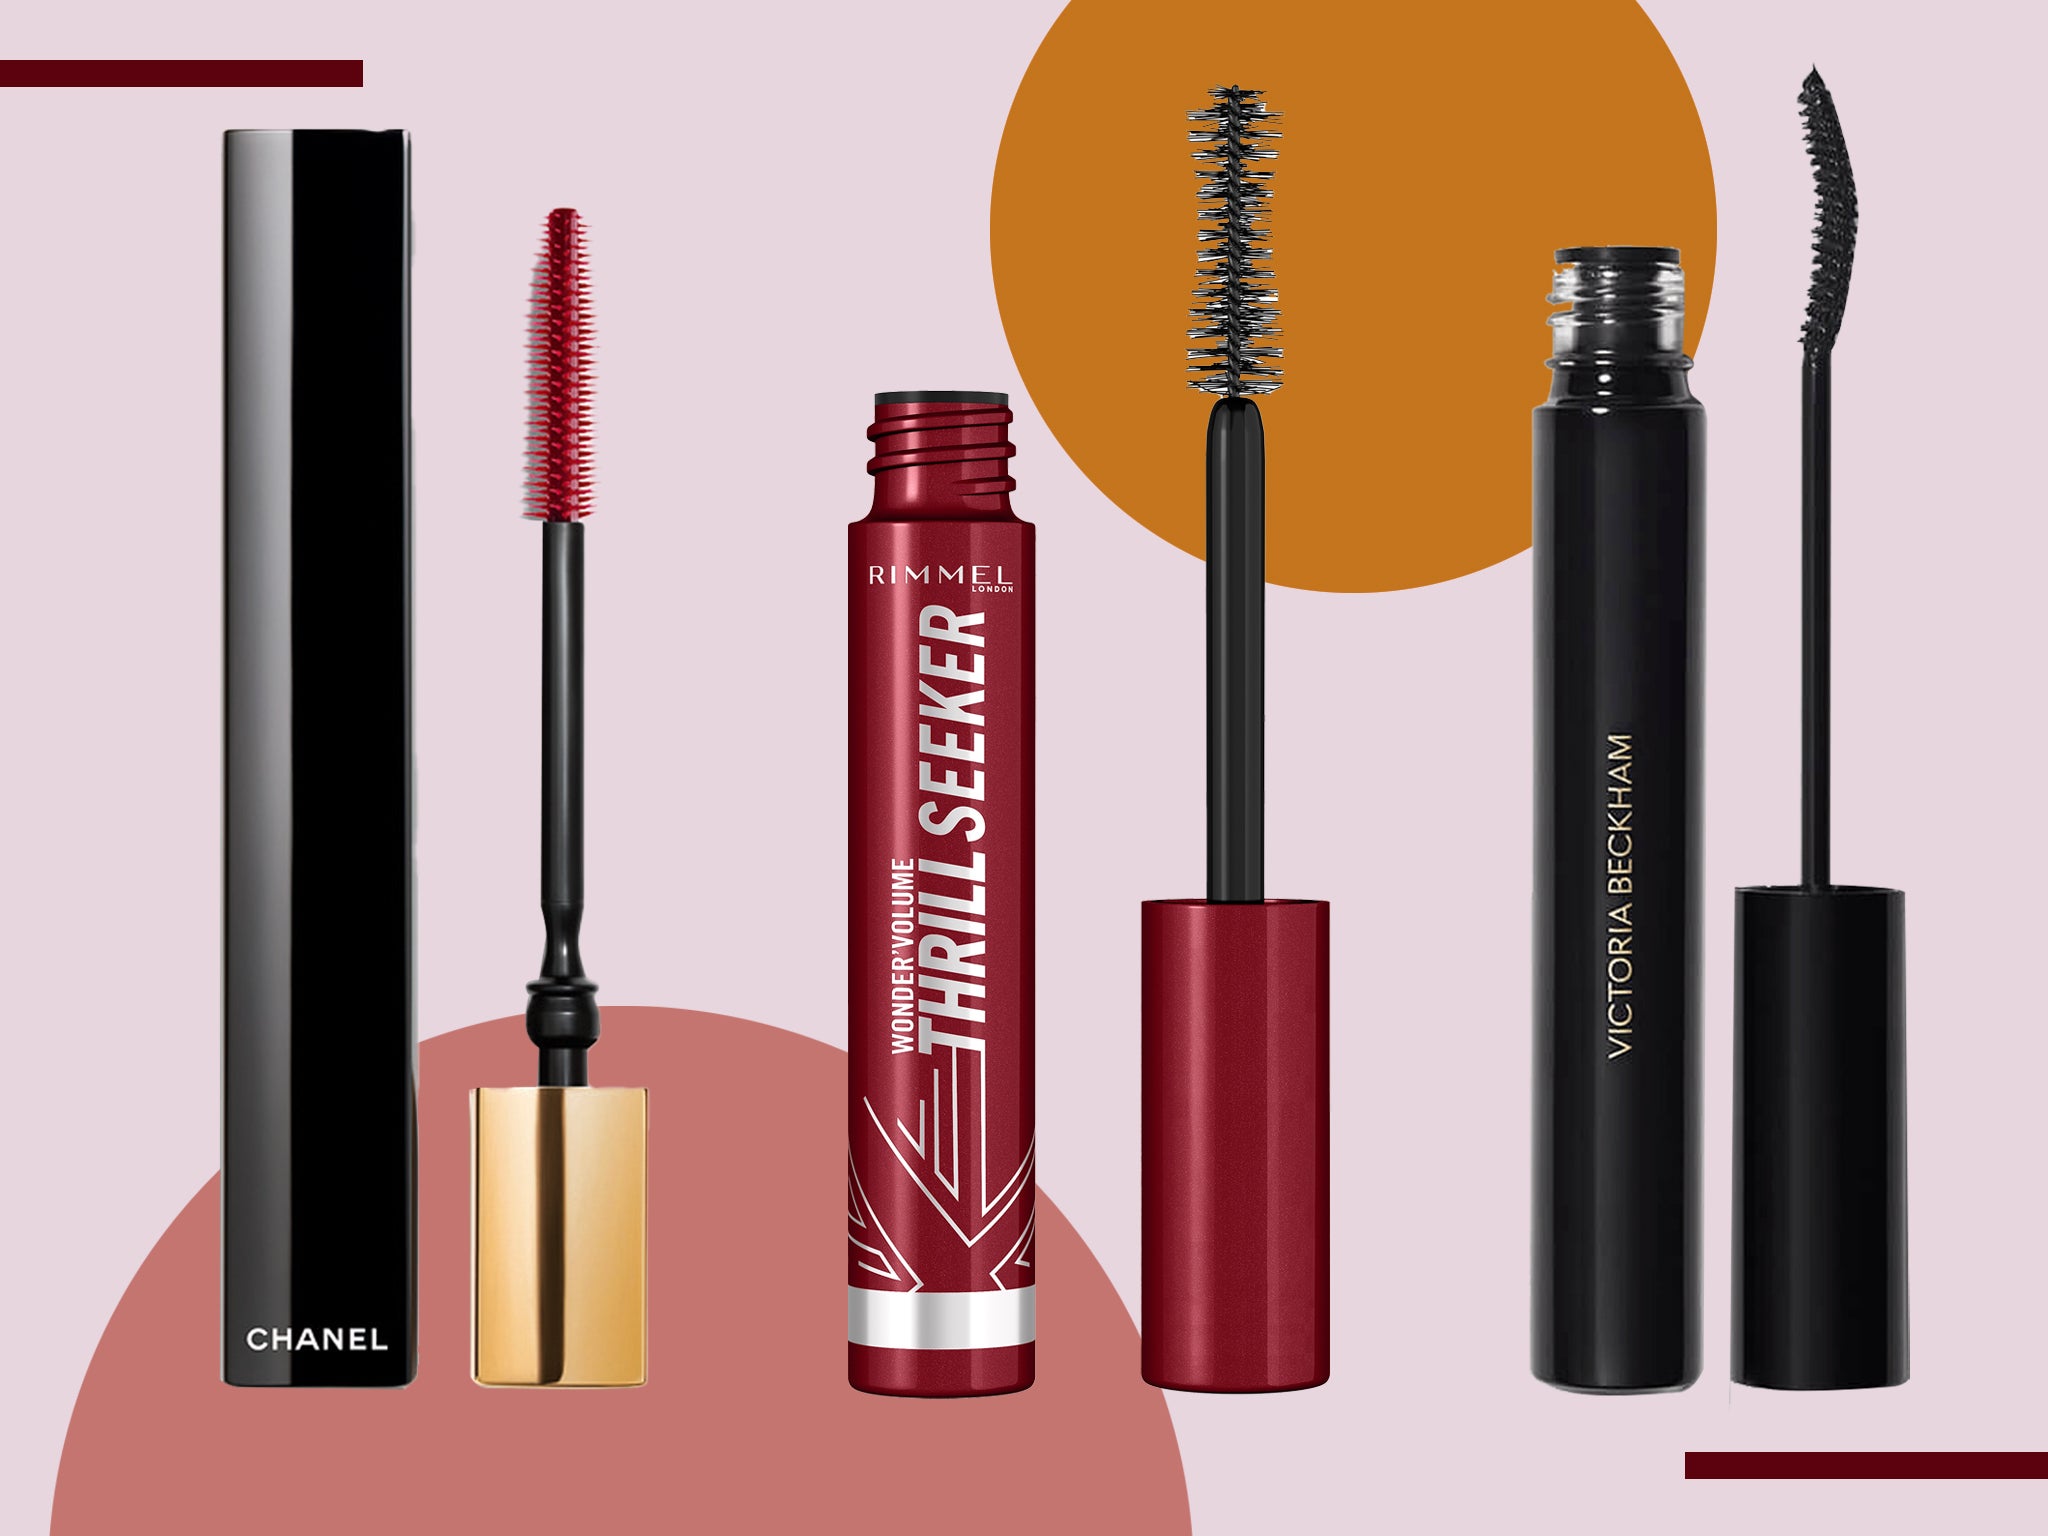 20 best mascaras for every look: From waterproof to vegan-friendly formulas